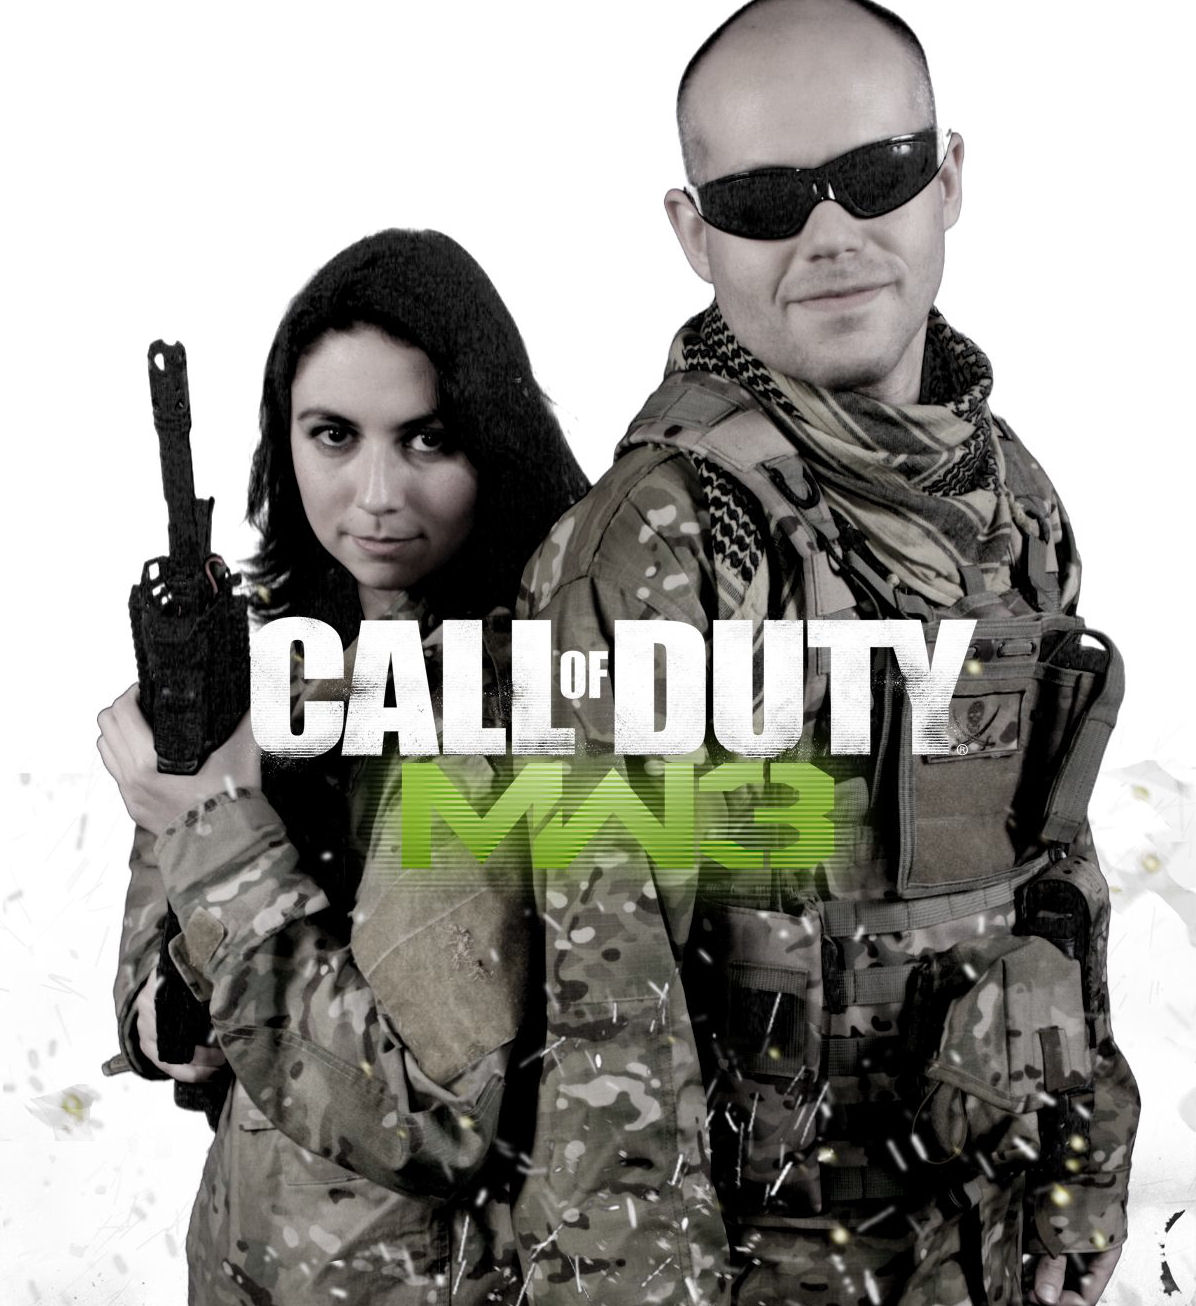 Debbie and Nick in costume for an alternate Call of Duty Modern Warfare 3 box cover